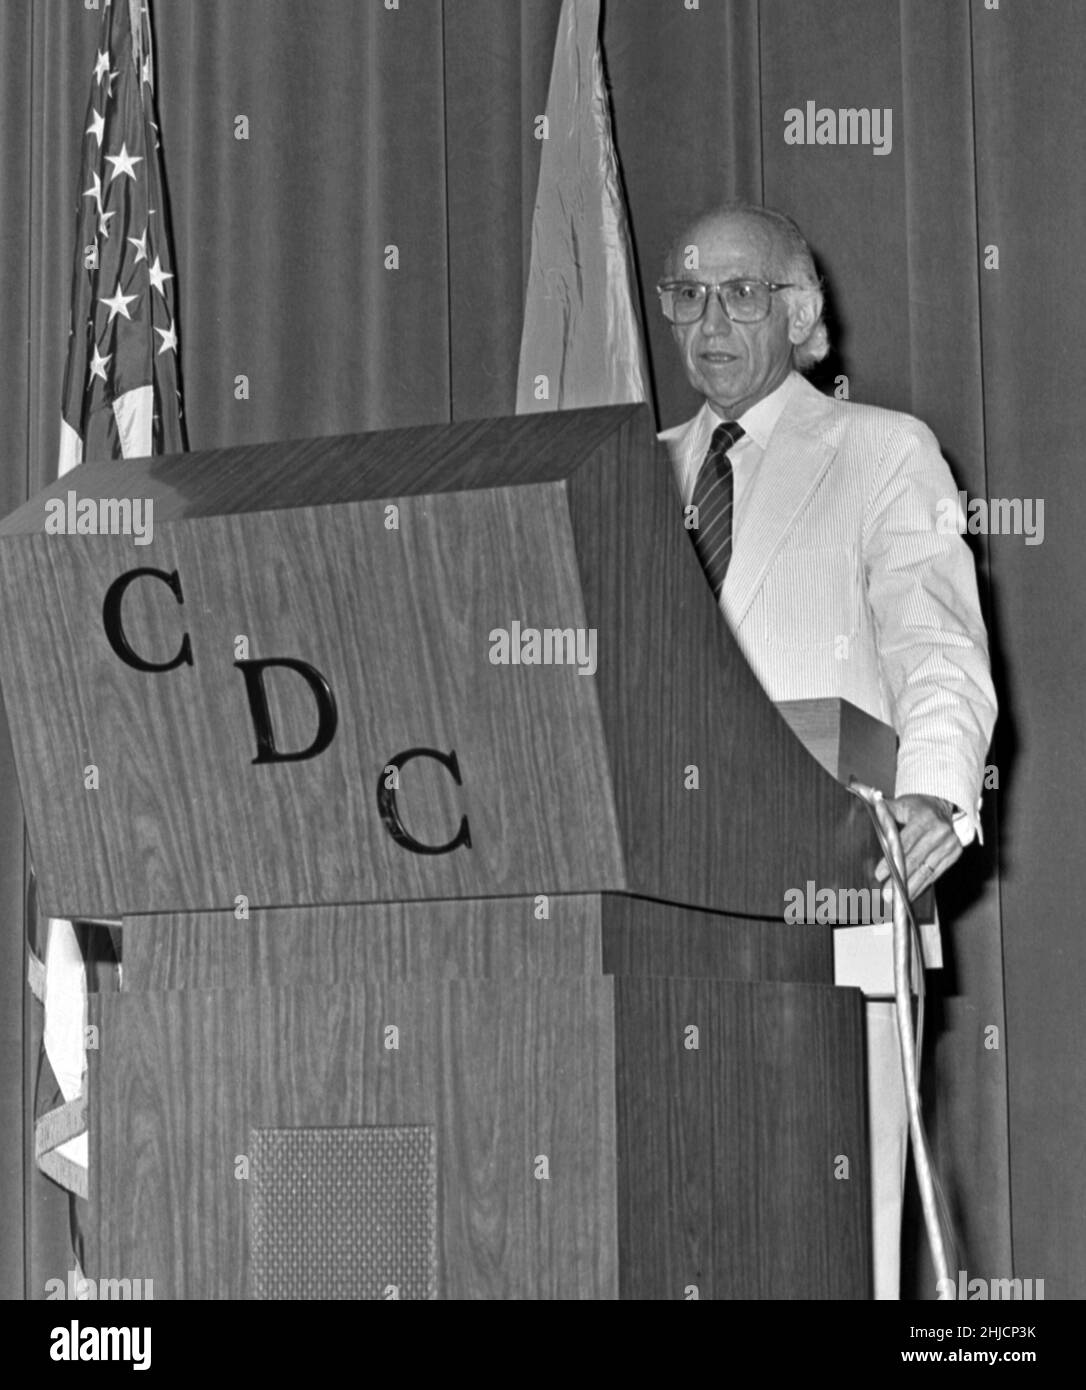 This photograph shows Dr. Jonas Salk (left), creator of the first polio vaccine in 1955, fielding questions during his visit to the CDC in 1988.  April 12, 2005, marks the 50th anniversary of the announcement that the polio vaccine, developed by Jonas Salk and his team of scientists at the University of Pittsburgh, worked. 'Safe, effective, and potent' were the words used to announce to the world that an effective vaccine had been found against a disease that once paralyzed 13,000--20,000 persons each year in the United States.  1988  / xxxxxx  image storage: xxxxxxxxxxxxx  CD 112 DH/ 040  htt Stock Photo